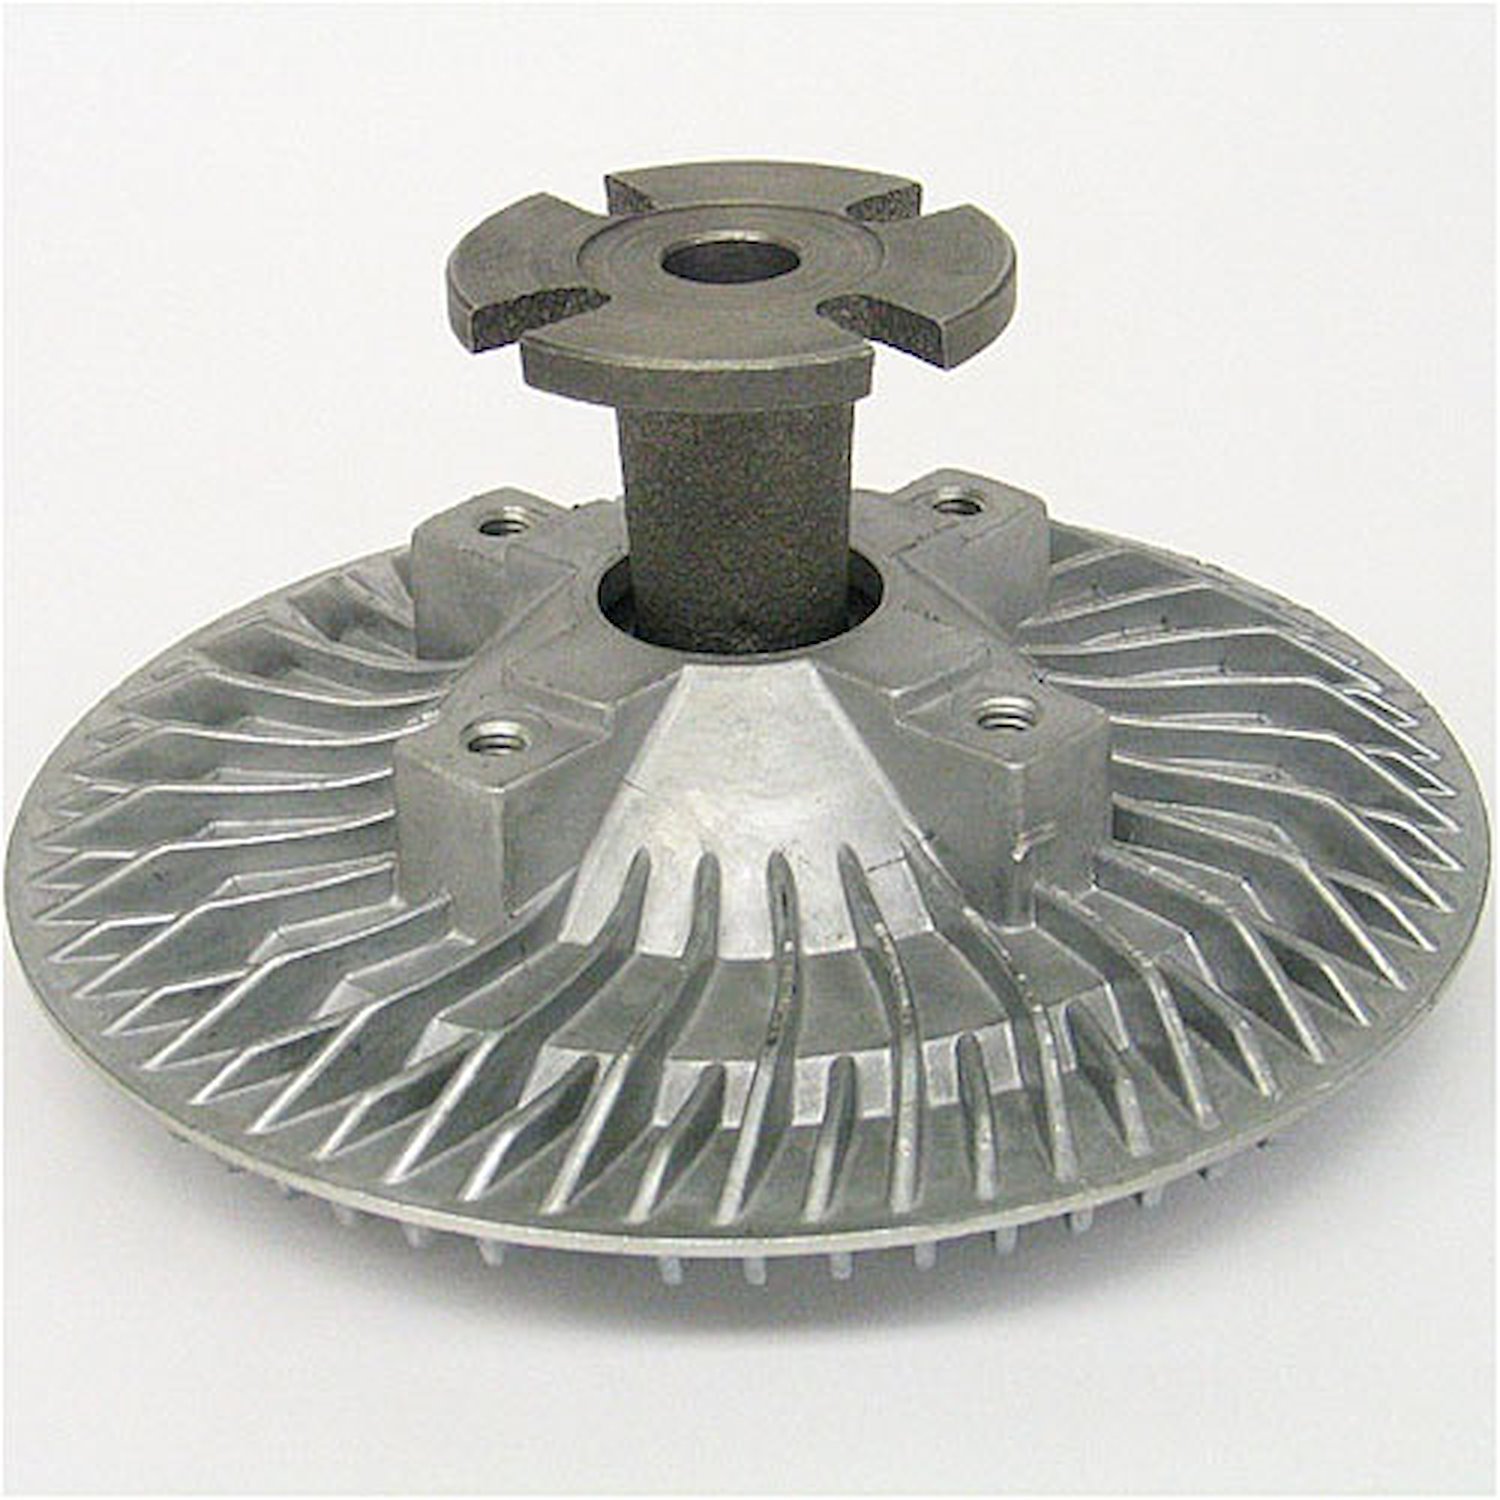 Standard Duty Thermal Fan Clutch for 1965-1986 Chevy/Cadillac